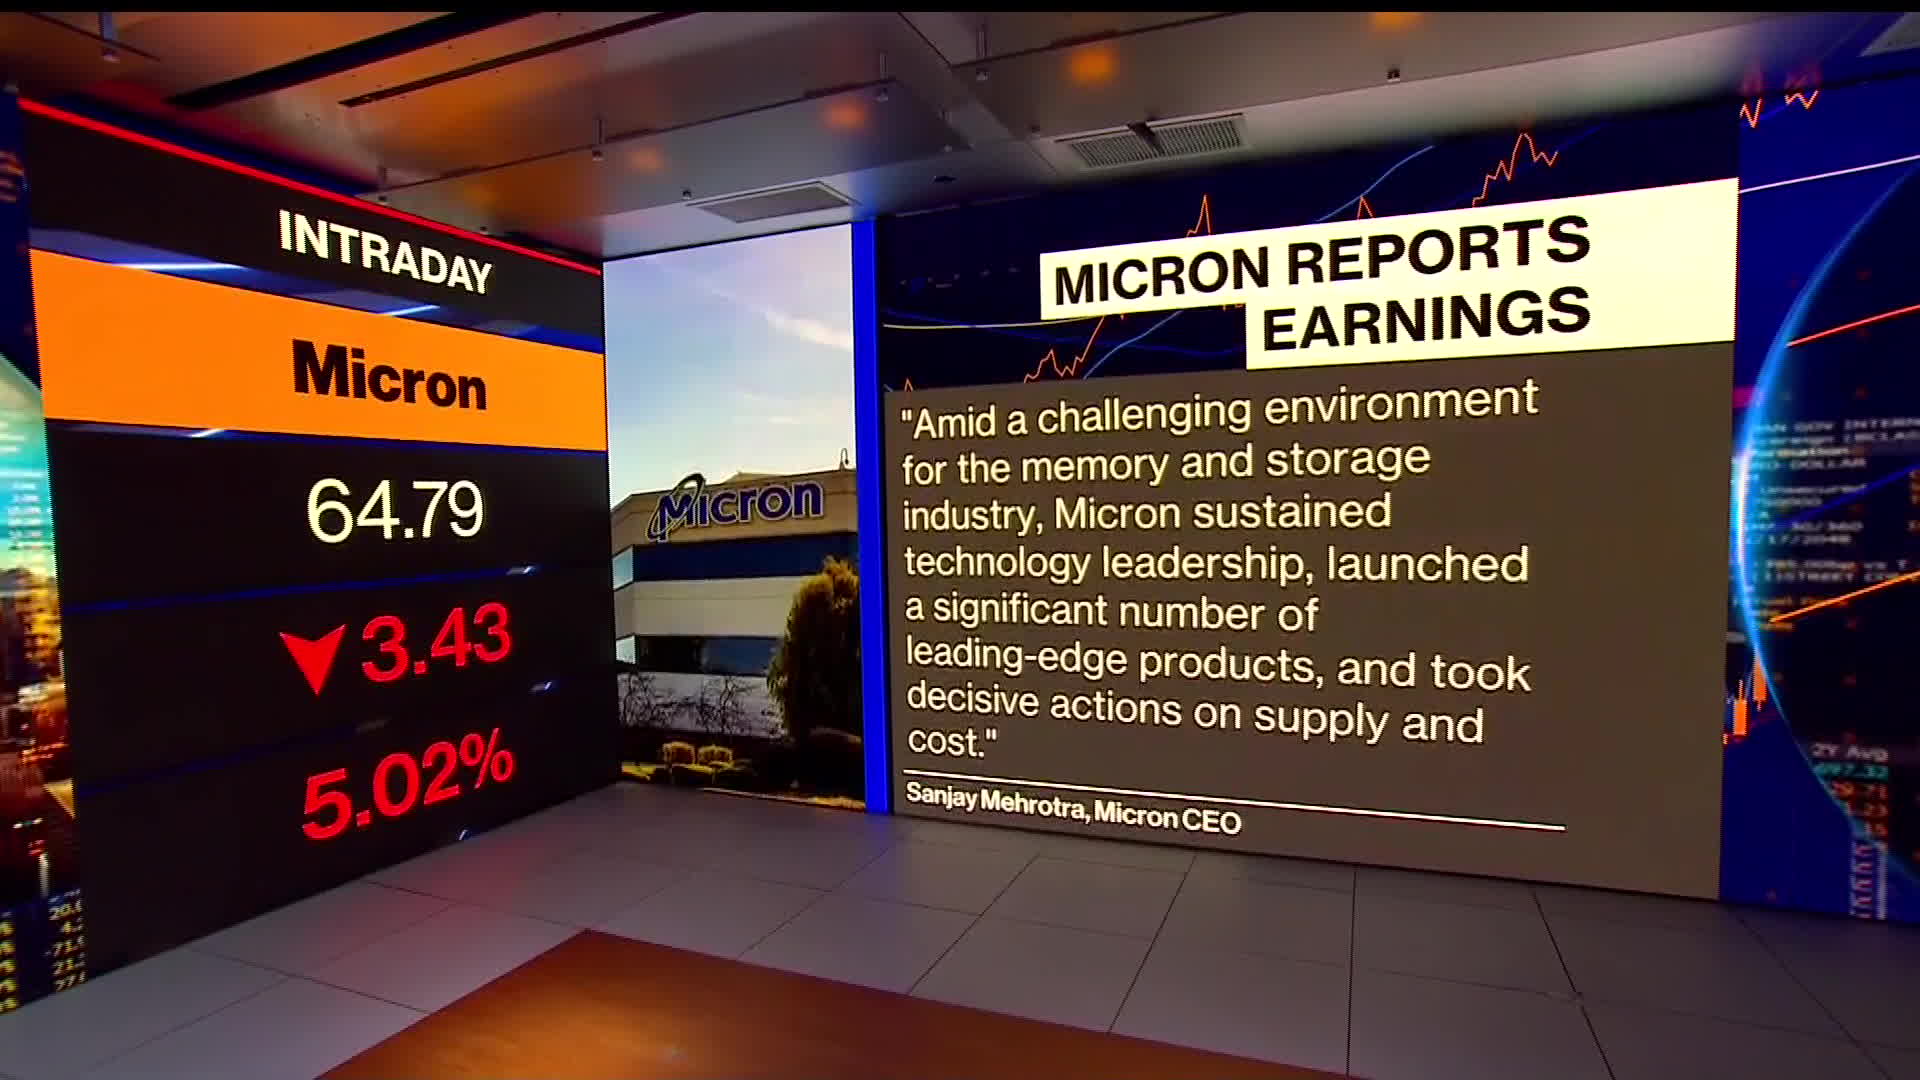 Micron Technology: Micron warns of tougher times, plans to cut investments  by 30%, ET Telecom